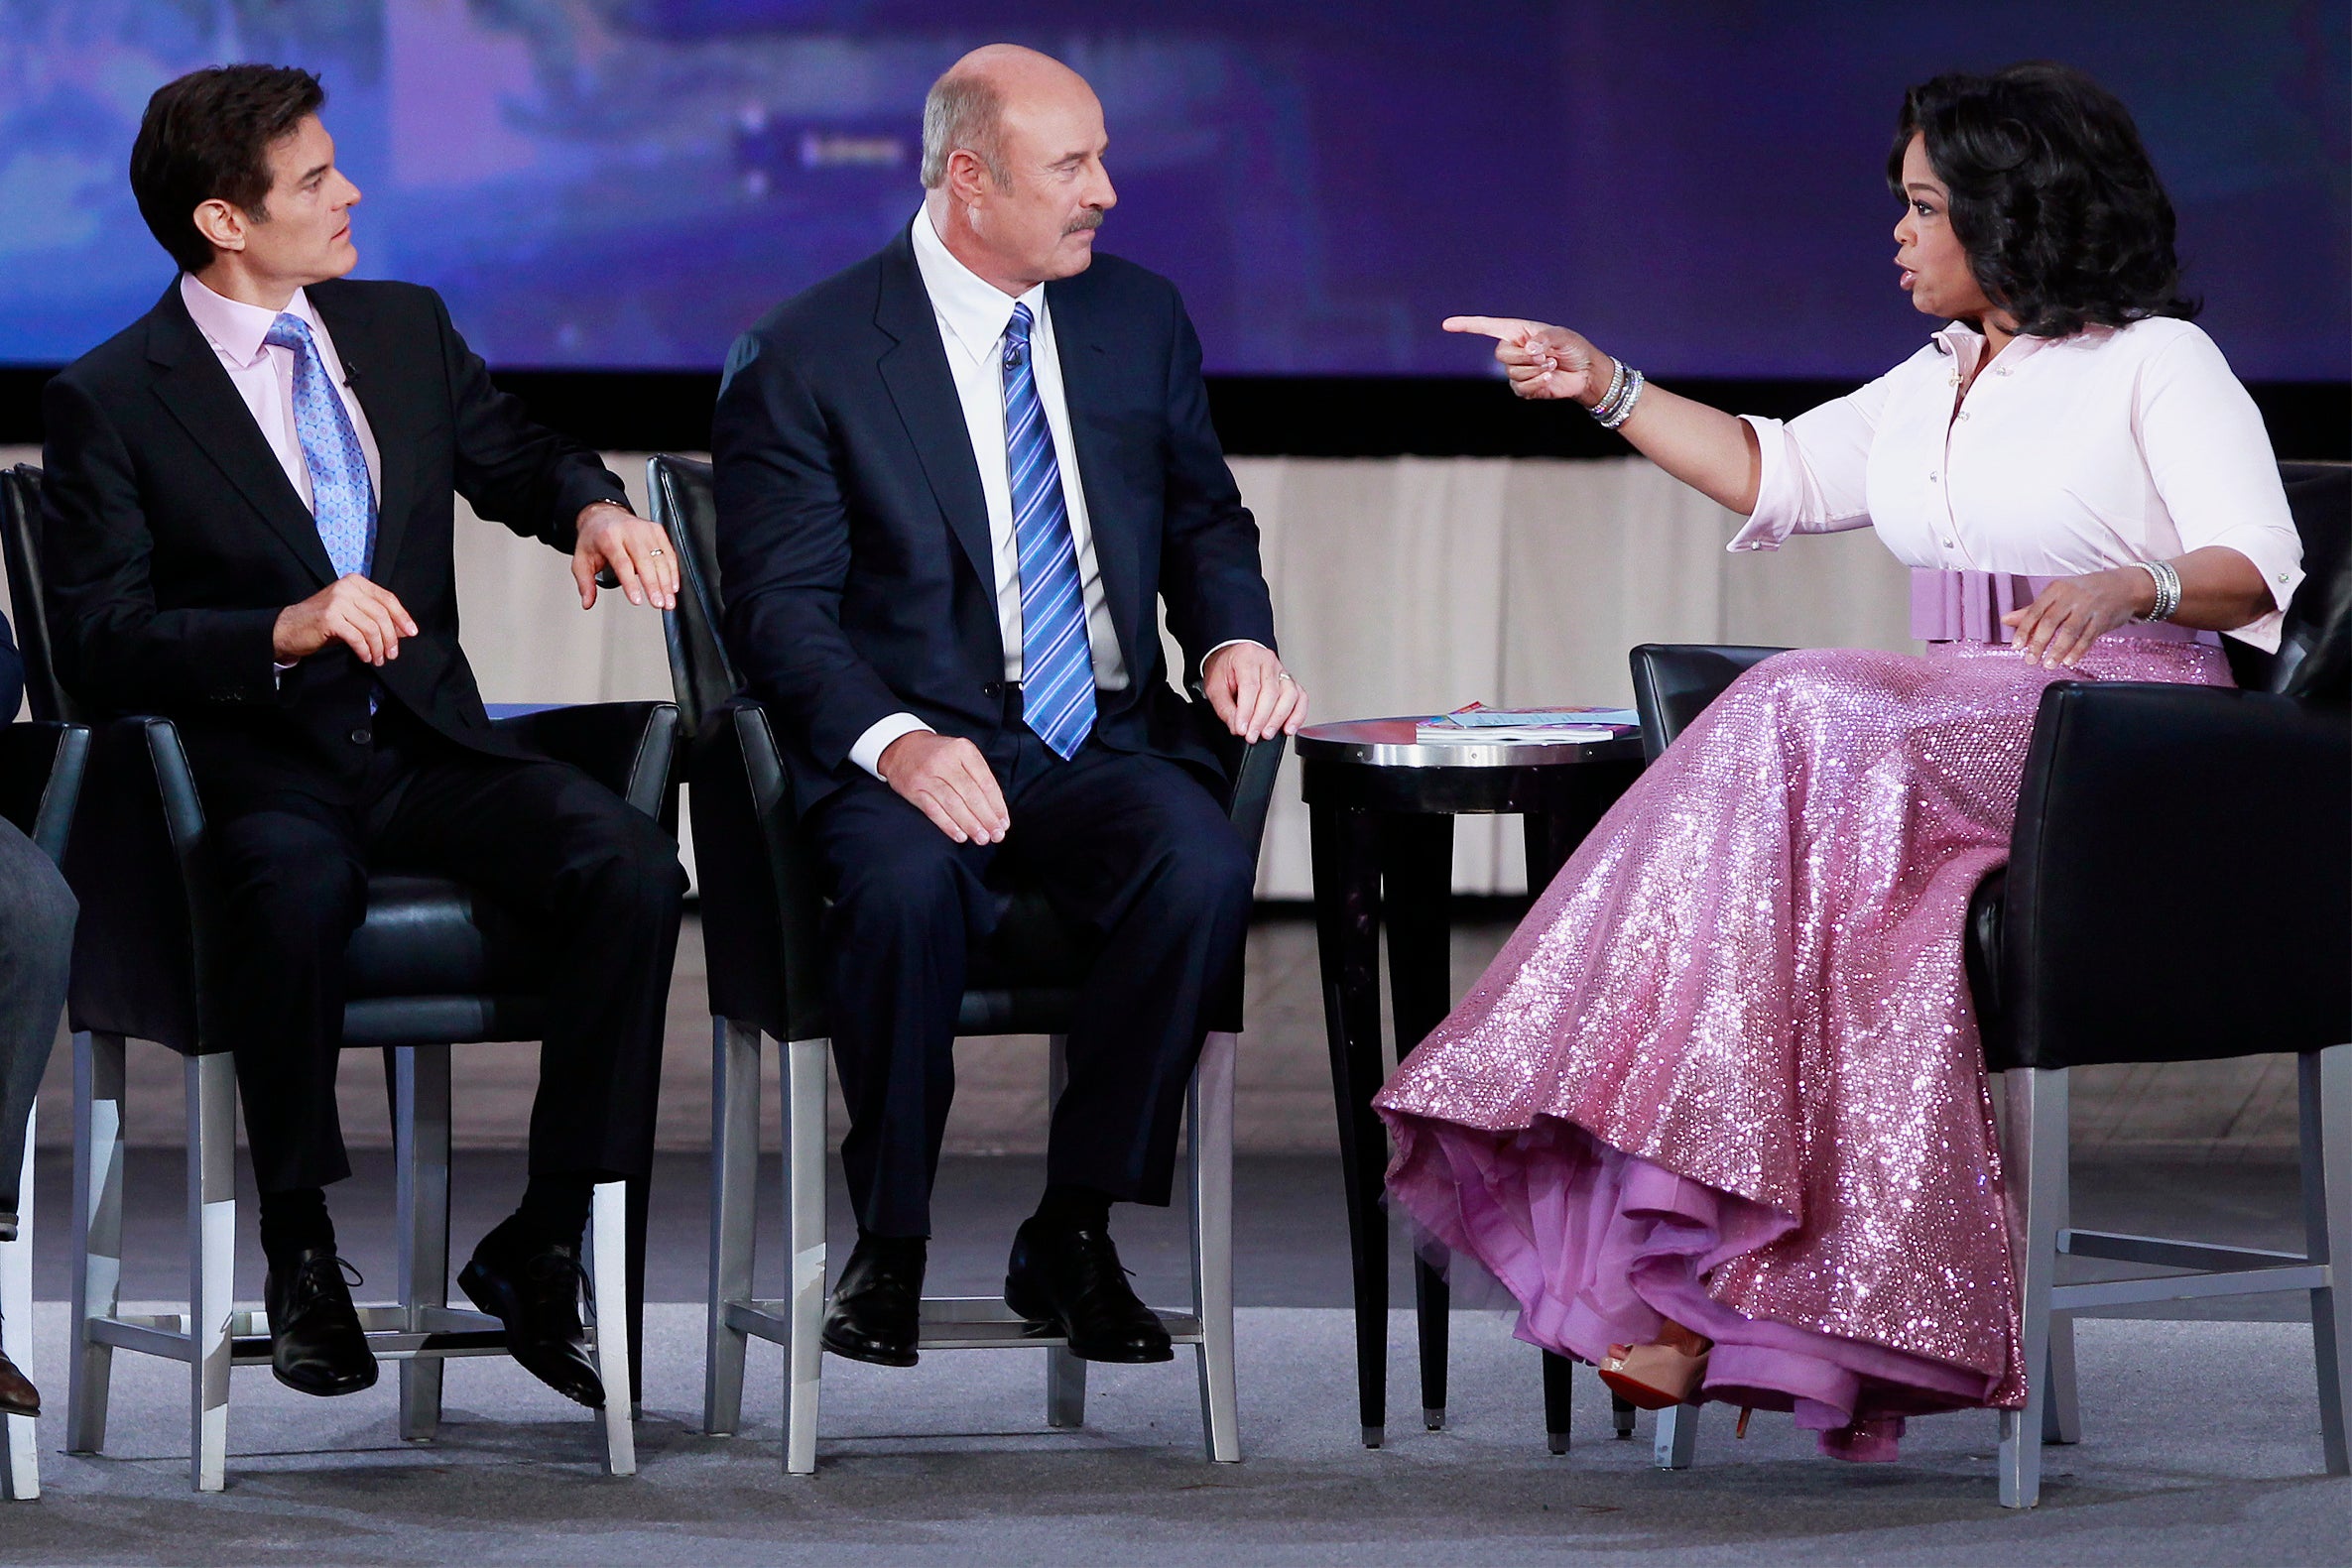 Dr. Oz, Dr. Phil, and Oprah Winfrey at Radio City Music Hall in New York City in 2010.